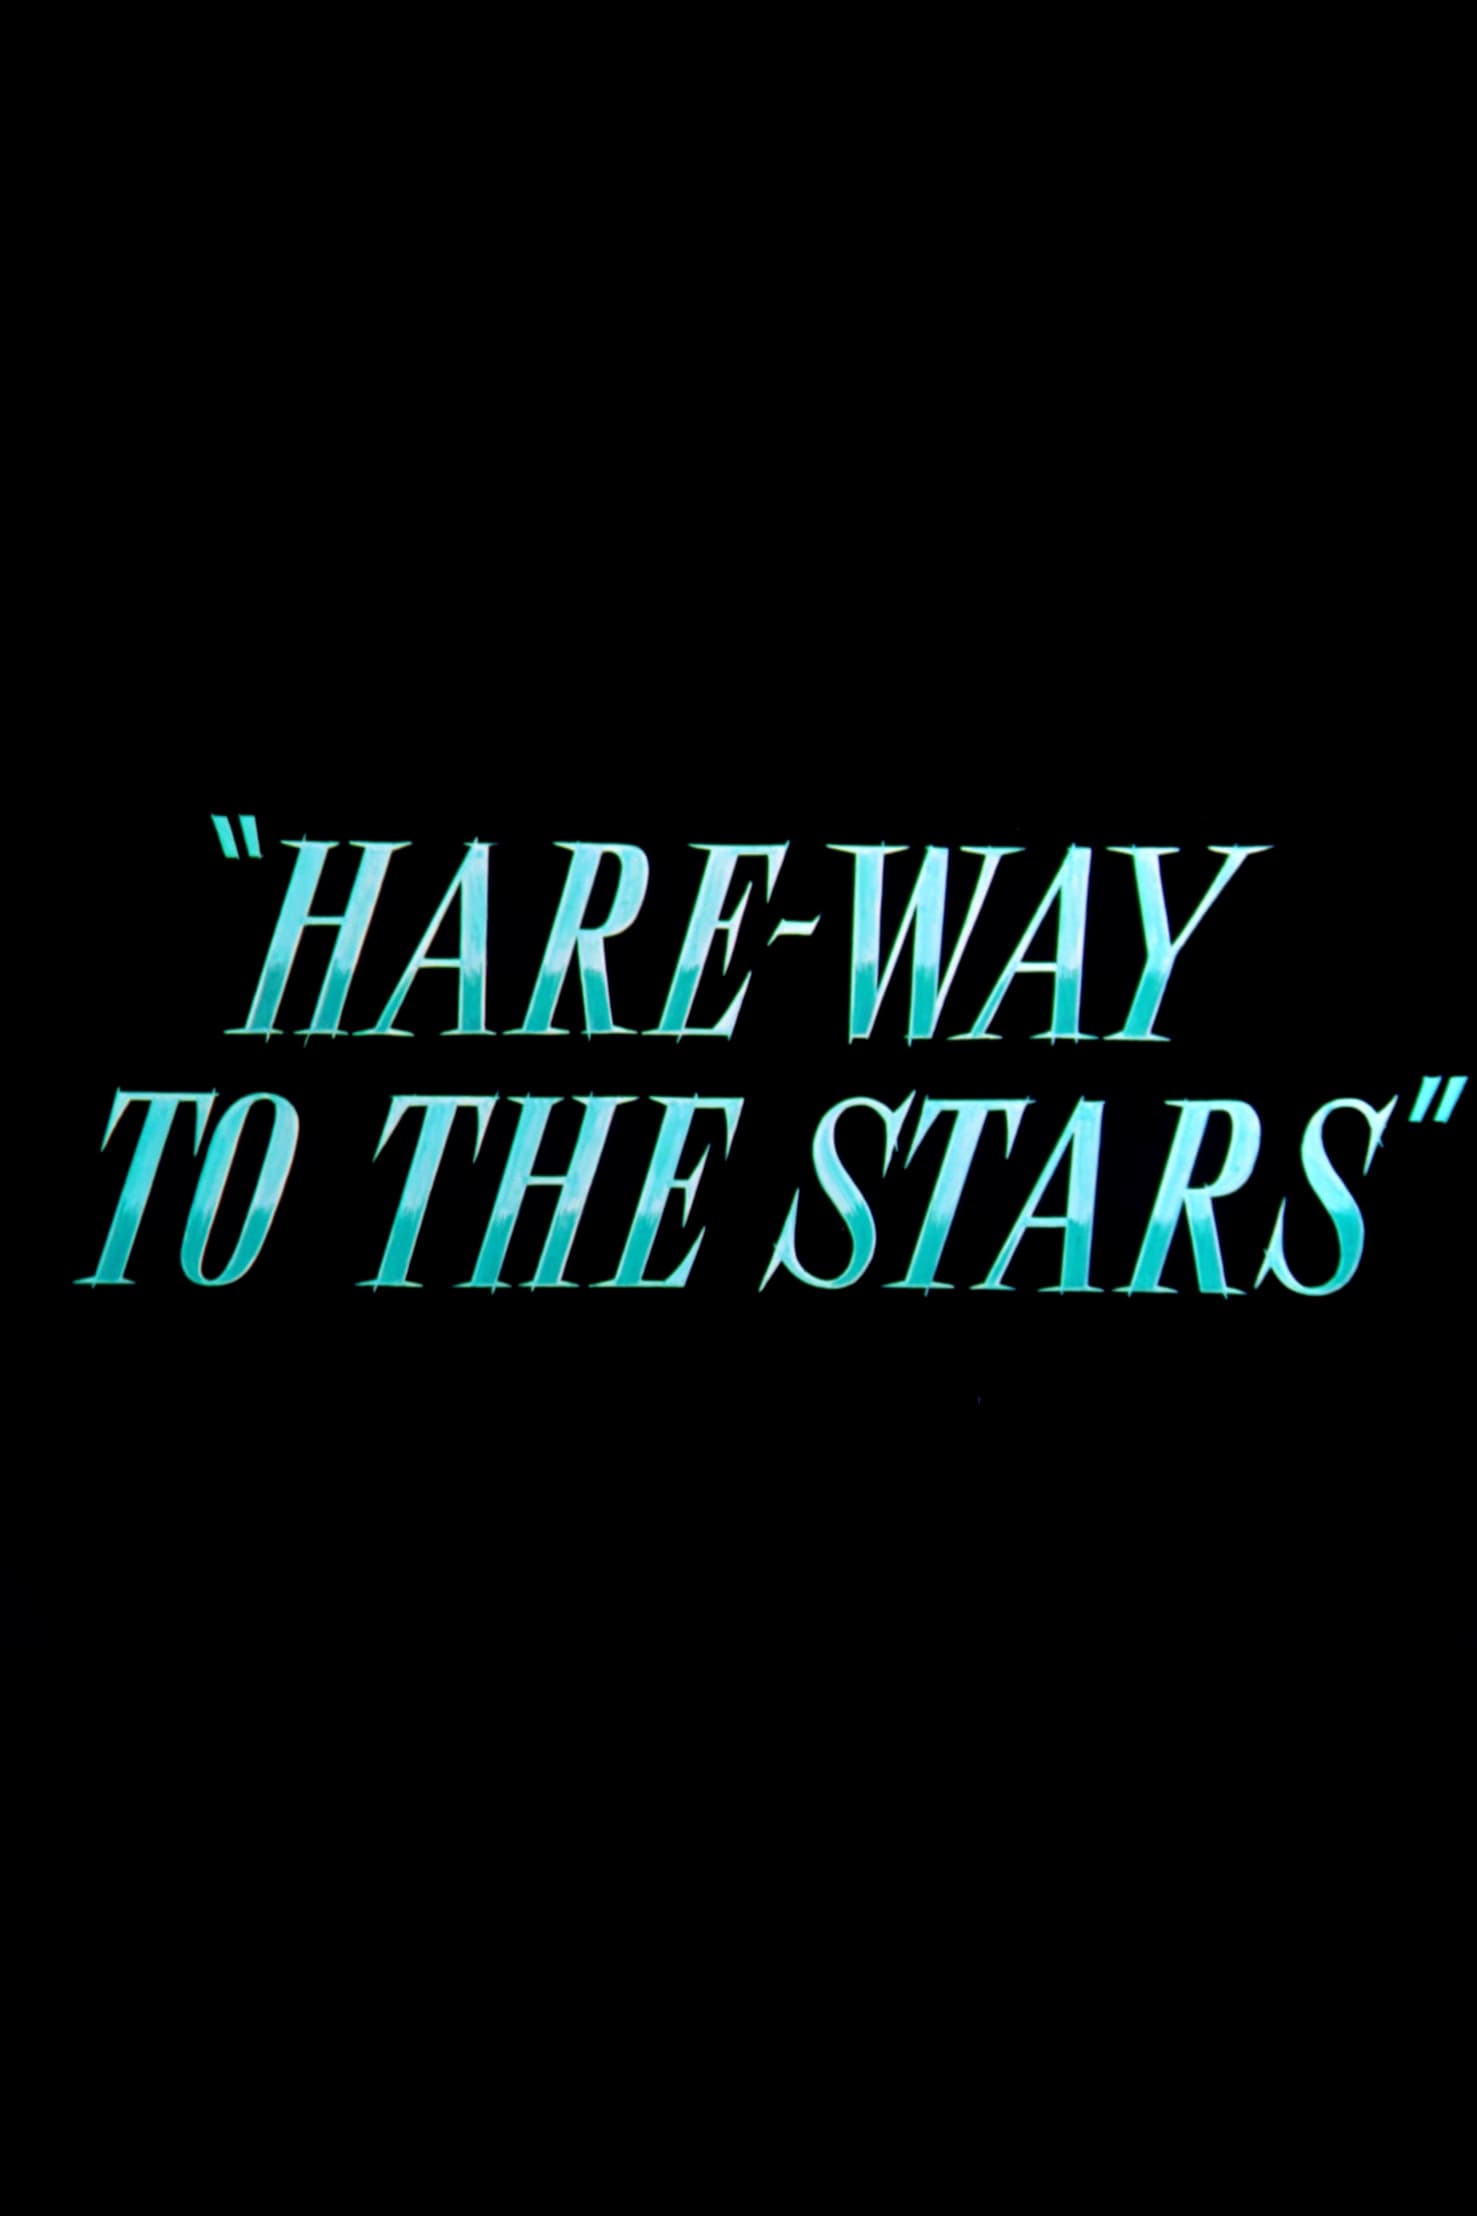 Hare-Way to the Stars (1958)